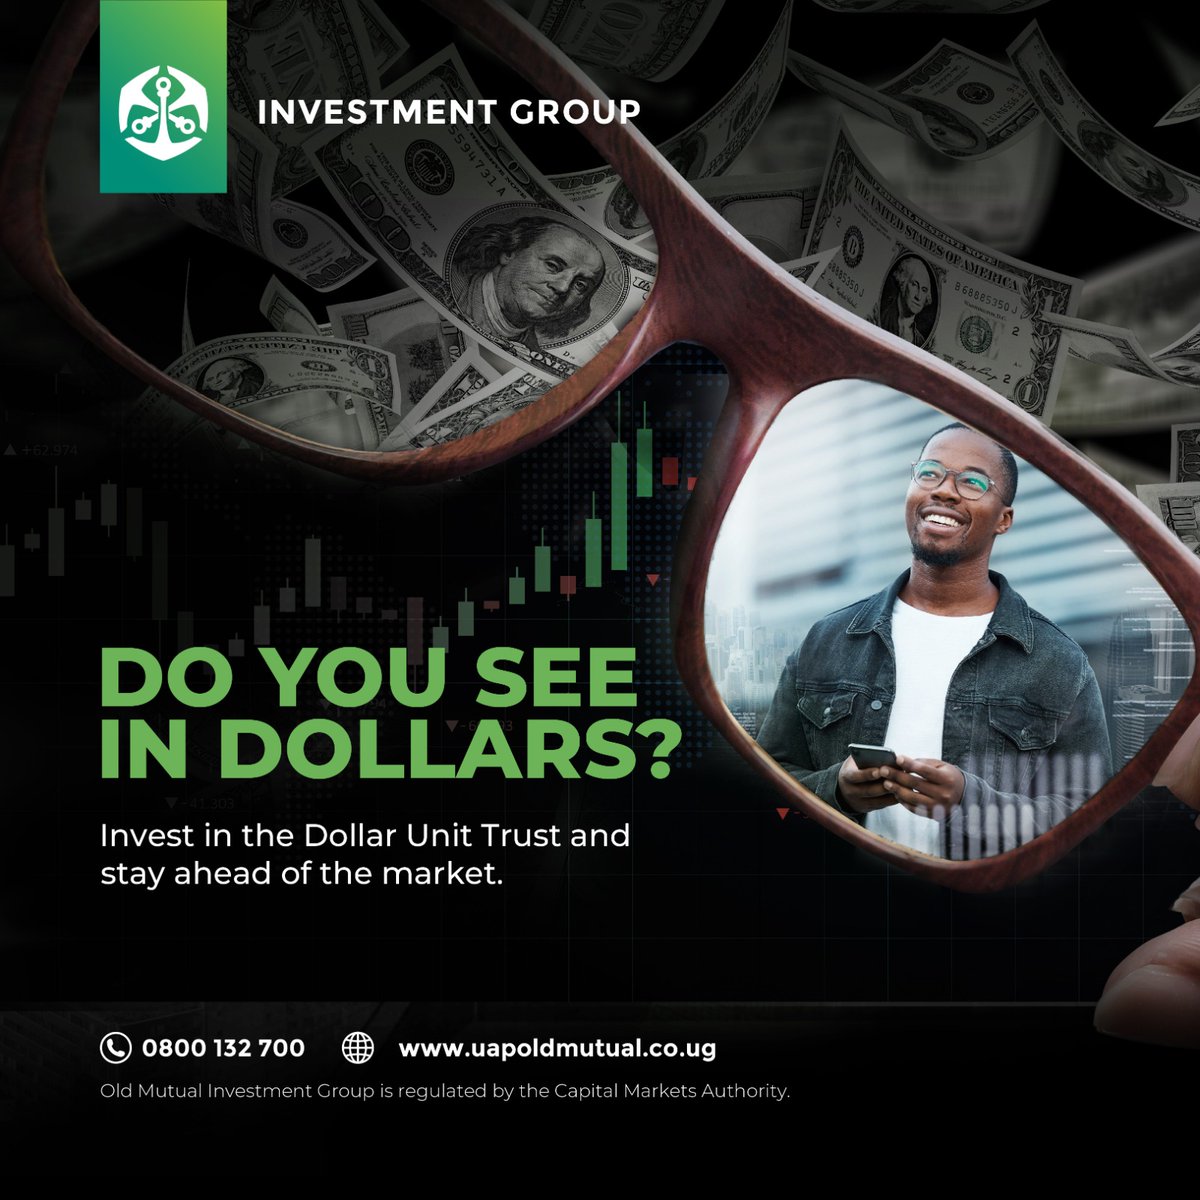 The #DollarUnitTrust offers a seamless convenient way to invest your dollar funds along with a tool for investors in a diversed set of financial instruments such as bonds and dollar notes. So invest in your money #TutambuleFfena